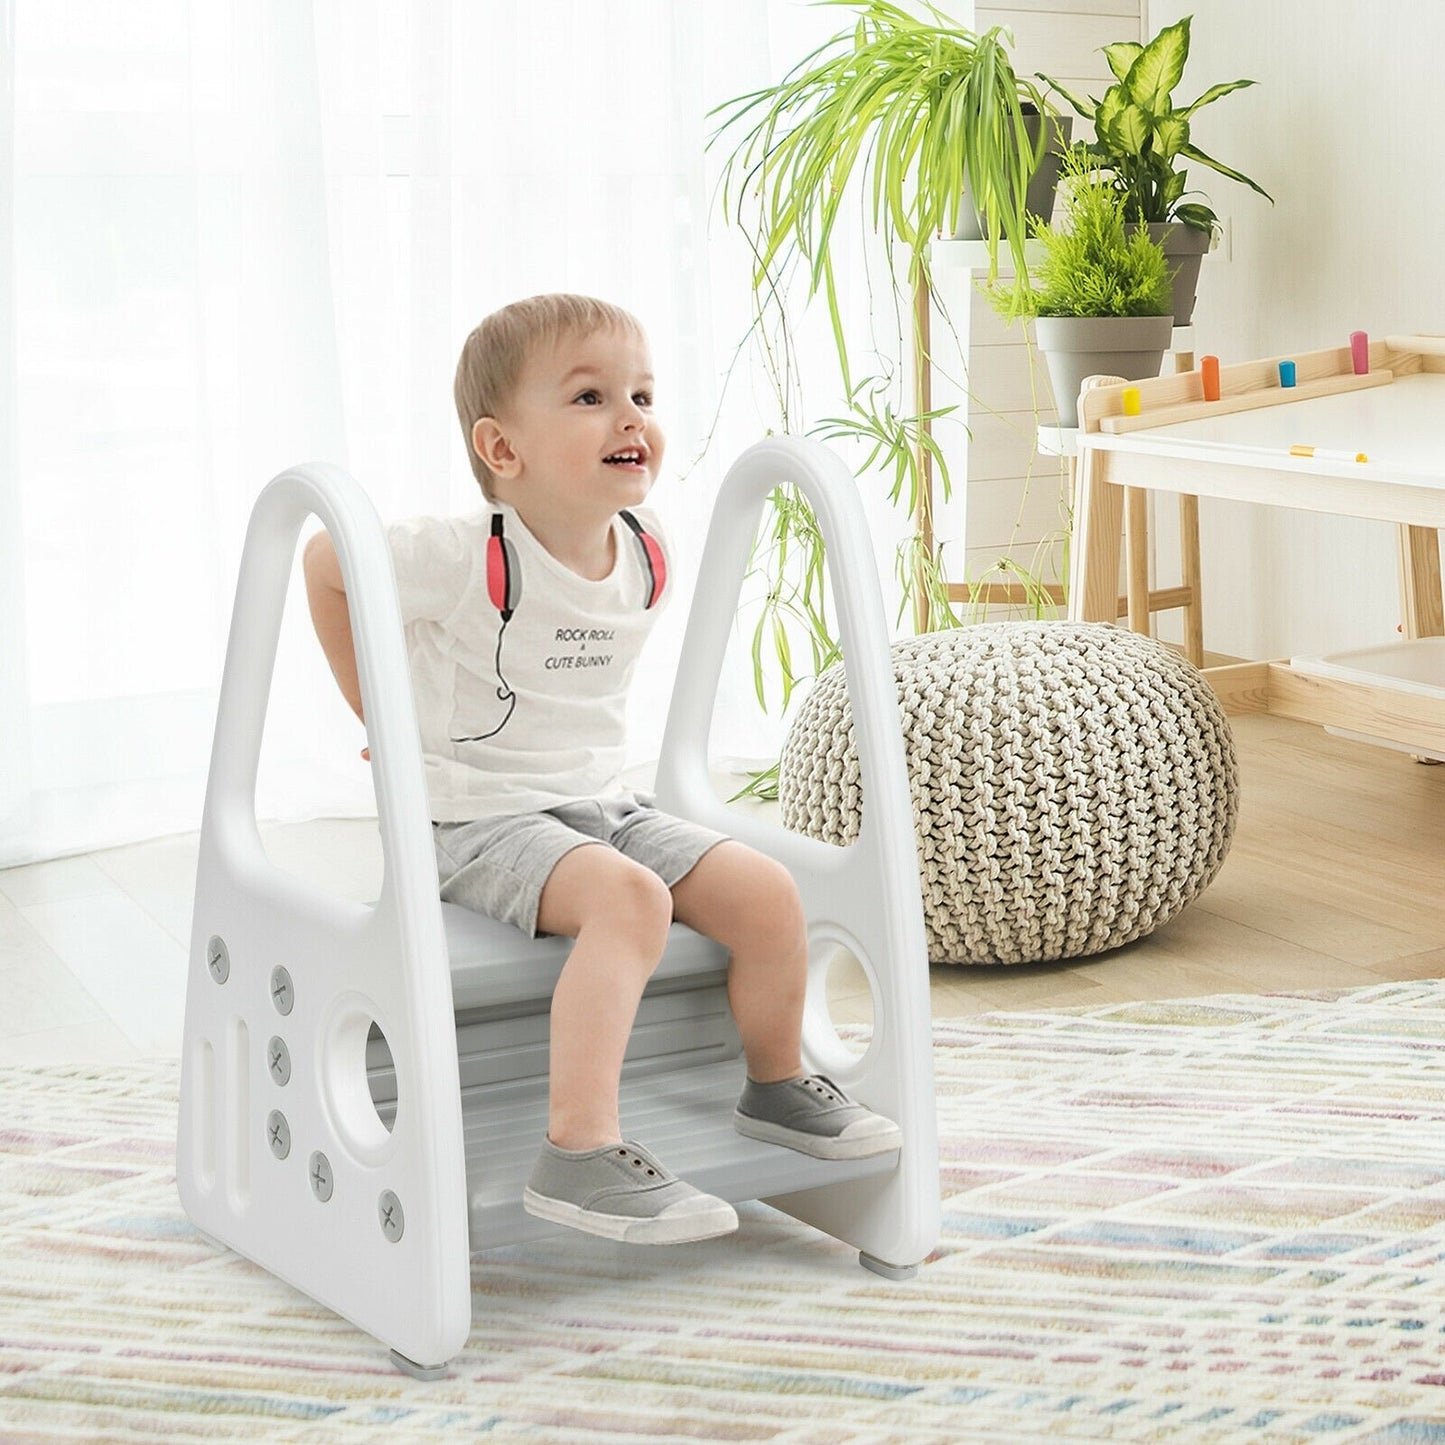 Kids Step Stool Learning Helper with Armrest for Kitchen Toilet Potty Training, Gray